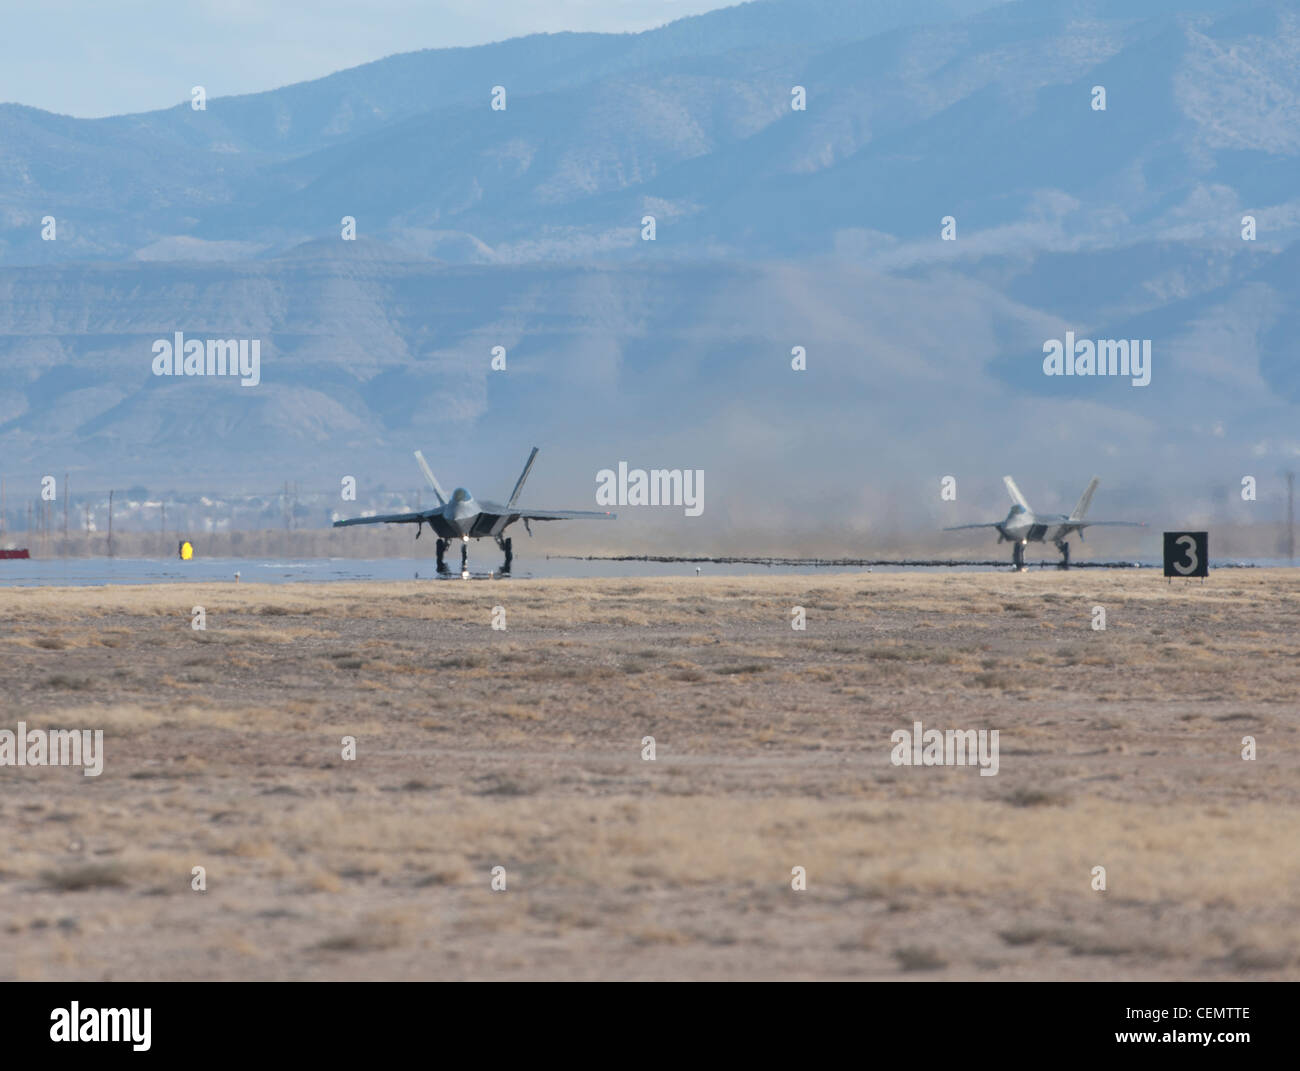 HOLLOMAN AIR FORCE BASE, N.M. - Two F-22 Raptors taxi onto the runway before a training mission Feb. 16. Holloman is home to the 7th Fighter Squadron and its fleet of F-22s. The F-22 has a combination of stealth, supercruise, maneuverability, and integrated avionics, and when coupled with improved supportability, represents an exponential leap in warfighting capabilities. Stock Photo